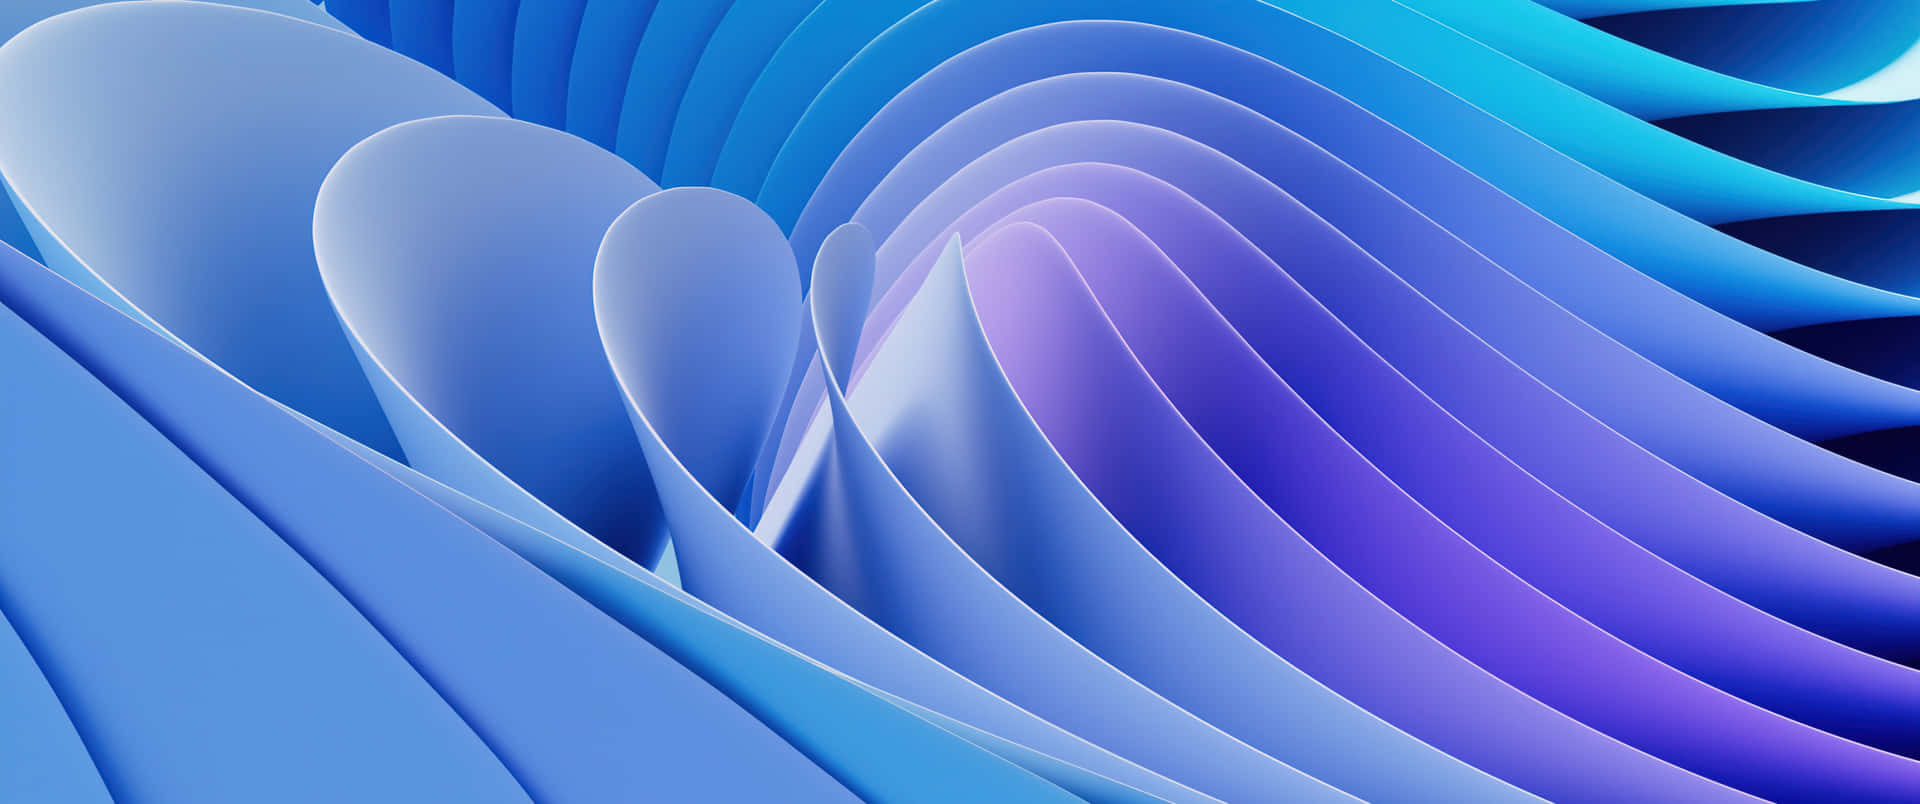 A Blue And Purple Abstract Background With A Wave Pattern Wallpaper